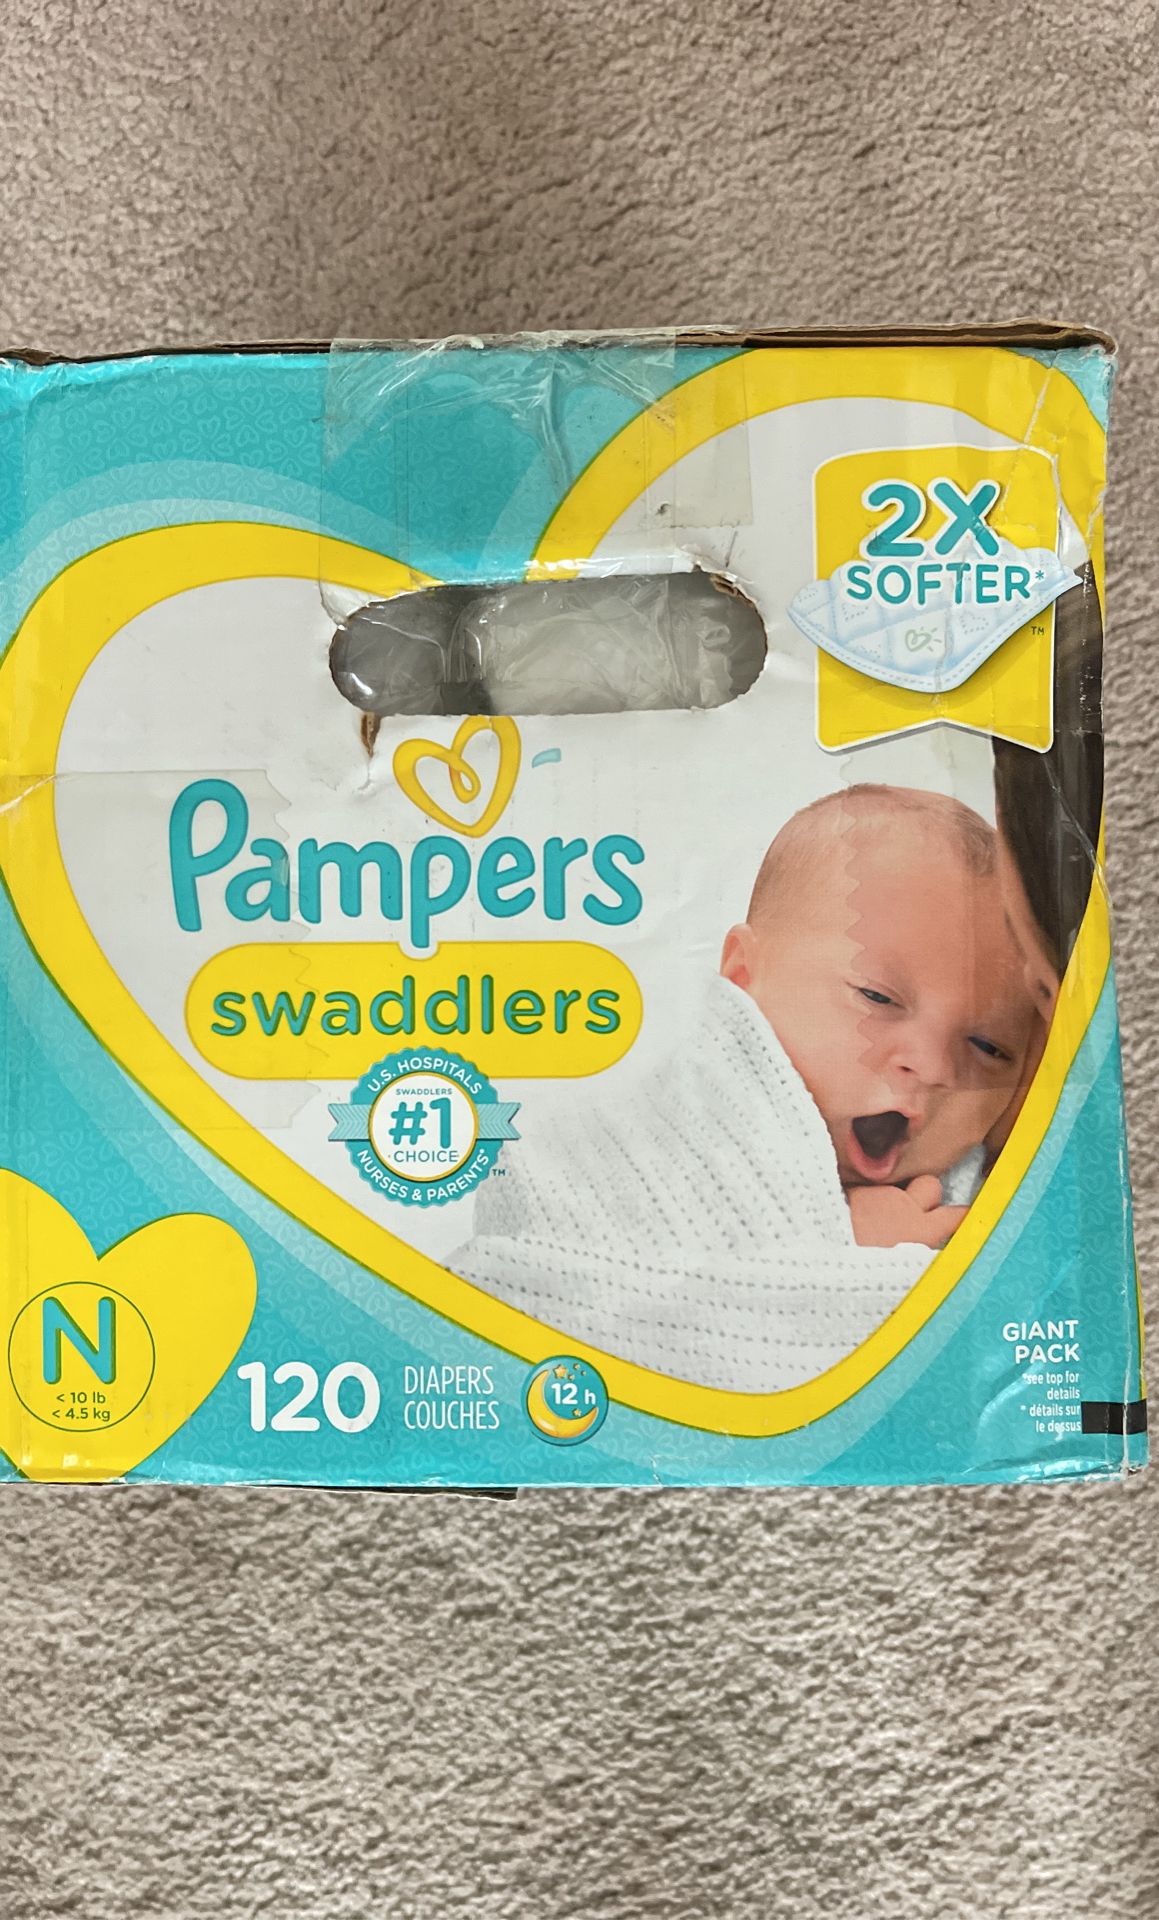 Pampers Swaddled Diapers